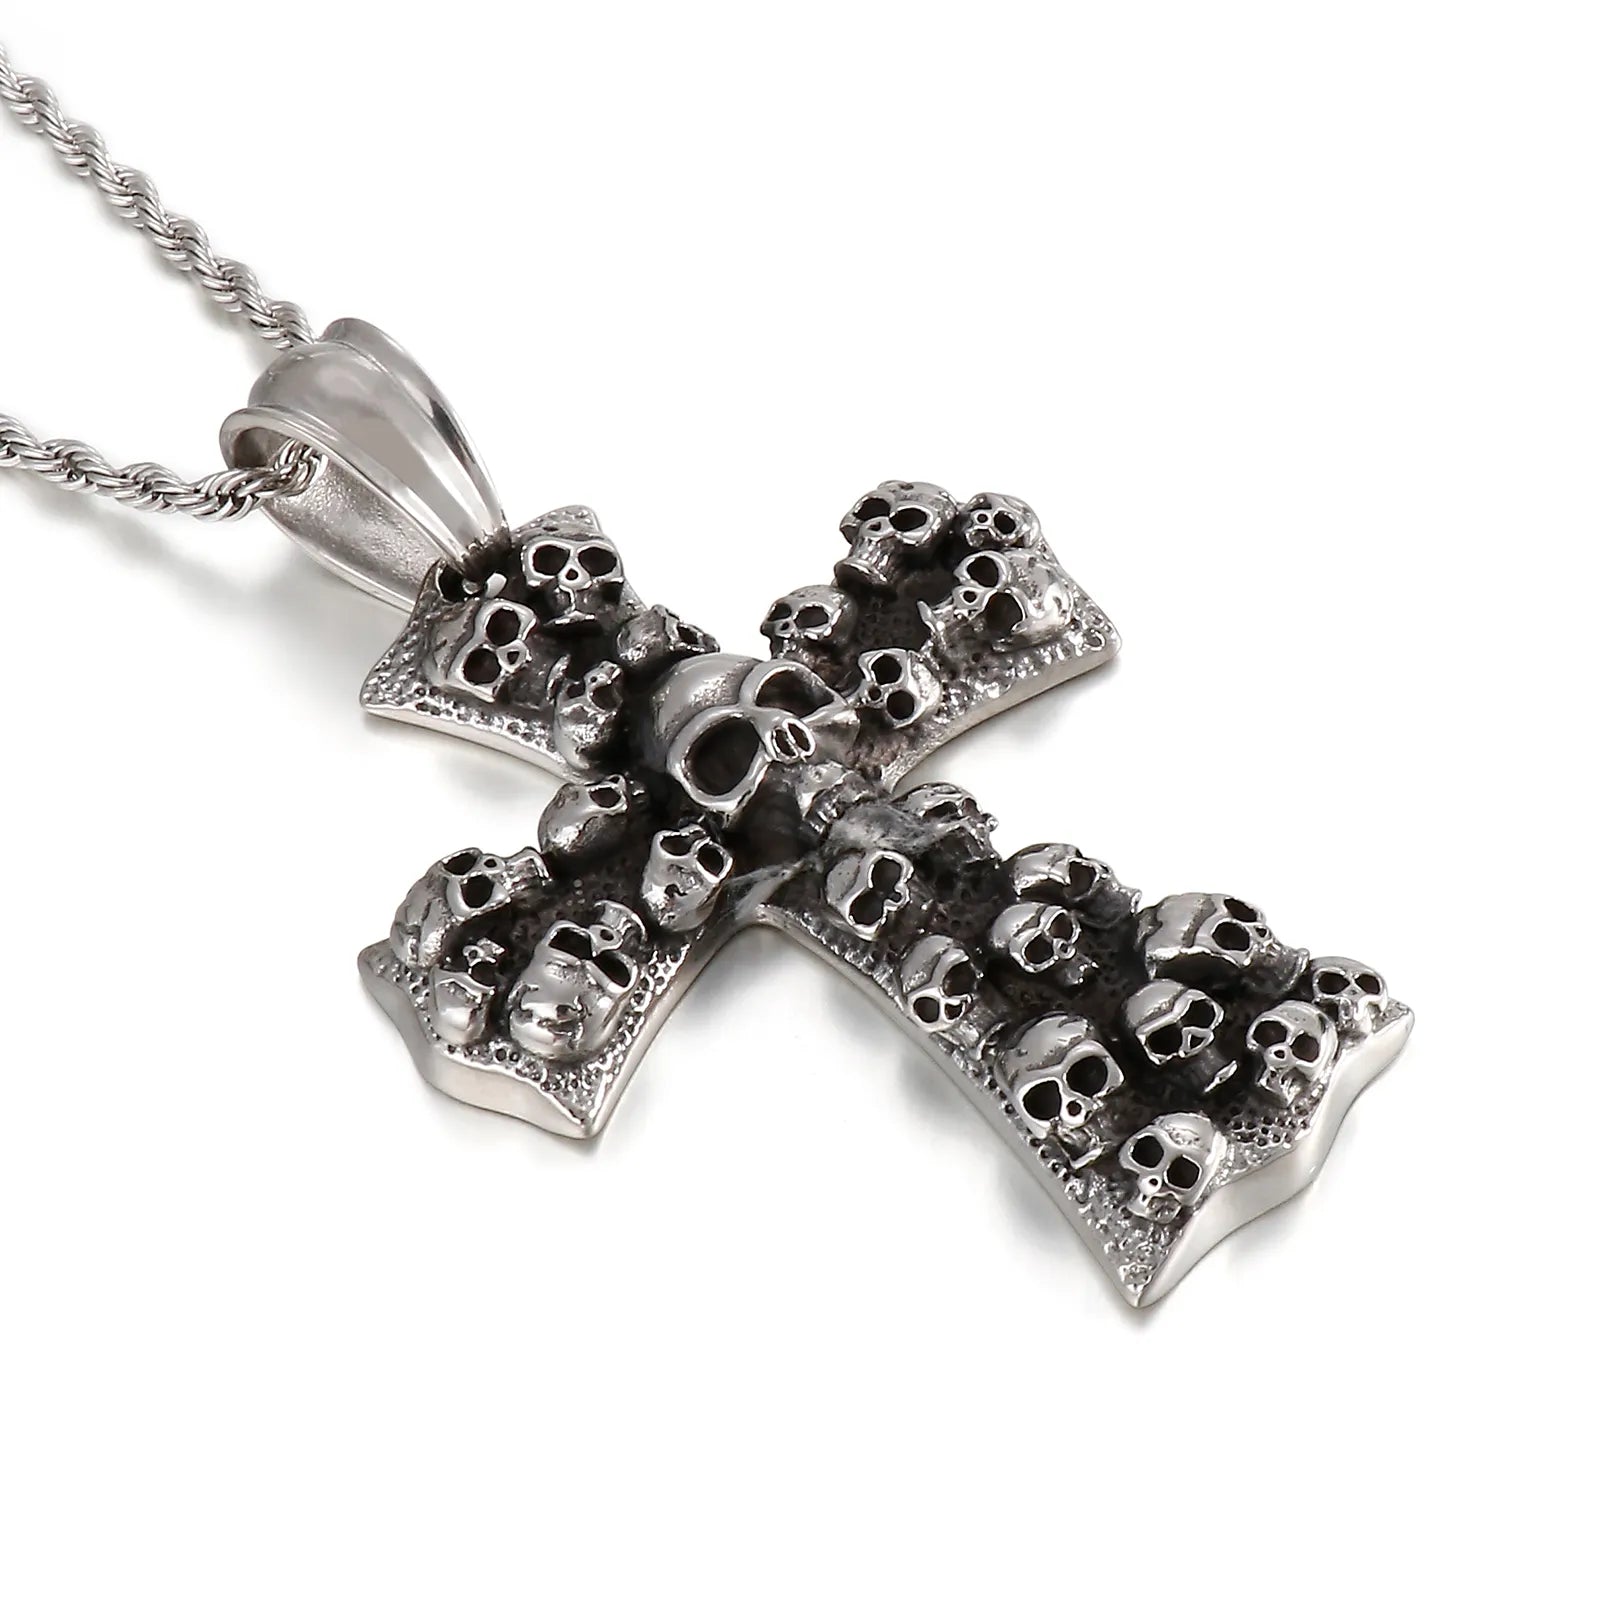 Huge Evil Cross Ghost Head Pendant Necklace - Men's Stainless Steel Jewelry. Badass skull pendant for men. Badass gifts for him. Badass gifts for badass. Badass birthday gifts. Badass Christmas gifts for badasses. Badass biker skull pendant. Badass biker skull jewelry. Badass skull jewelry. Badass skull accessories. Valentine gifts for him. Anniversary gift for him. Anniversary gift for my badass husband. Badass Birthday gift for my badass boyfriend. Badass Birthday gift for my badass husband.